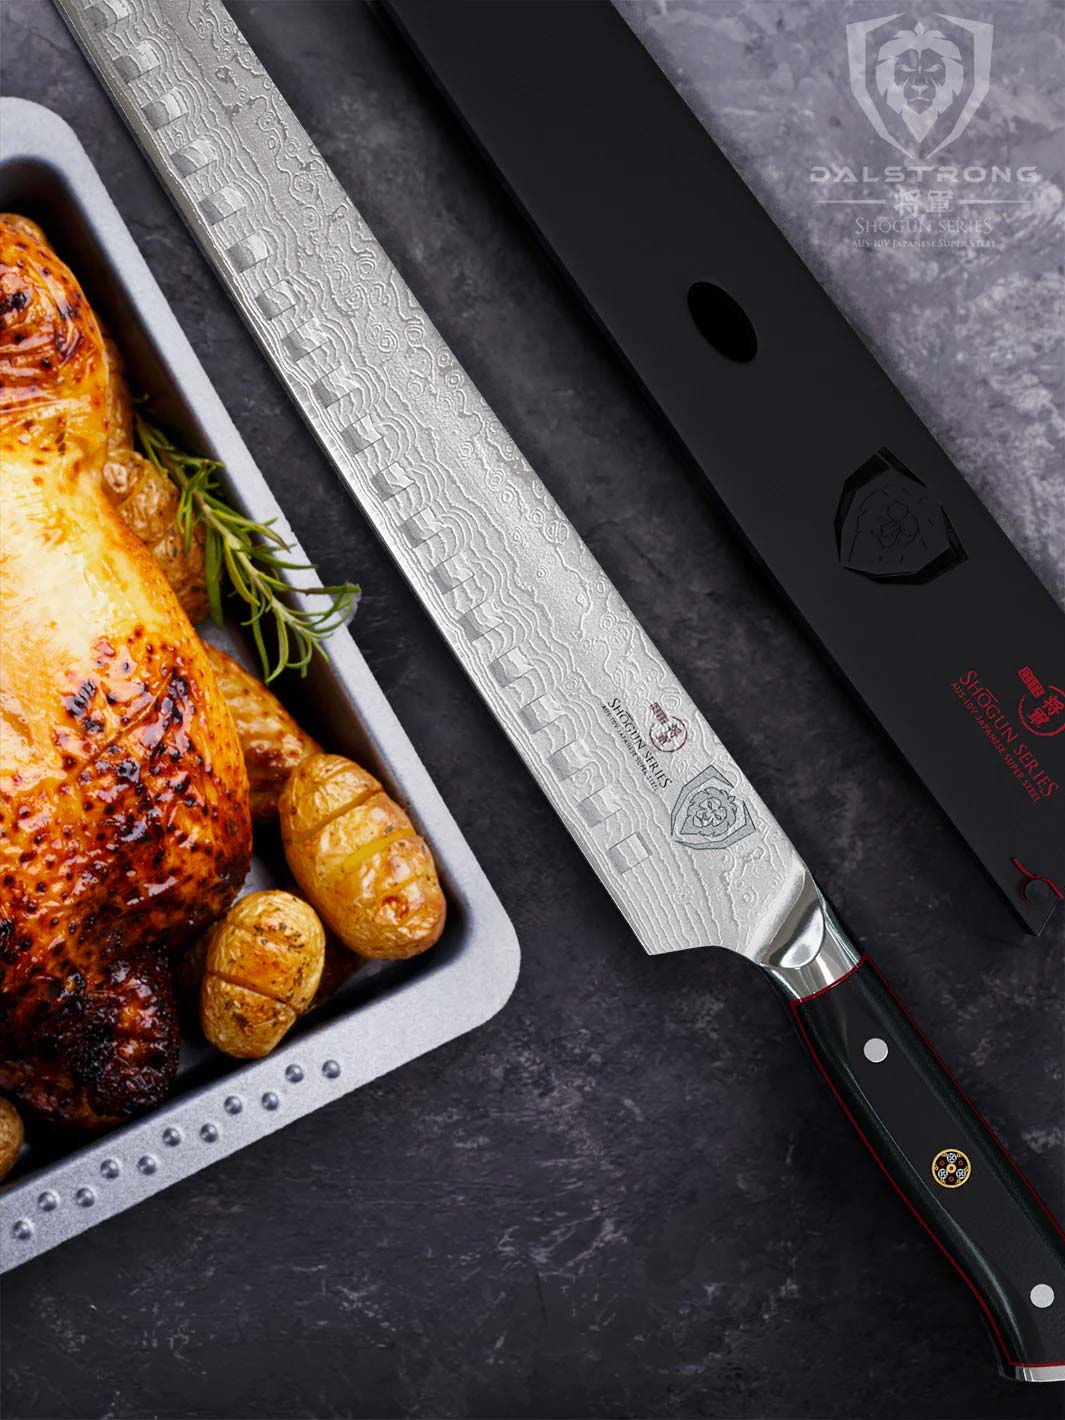 Dalstrong shogun series 14 inch extra long slicer knife with black sheath and roasted turkey in a tray.